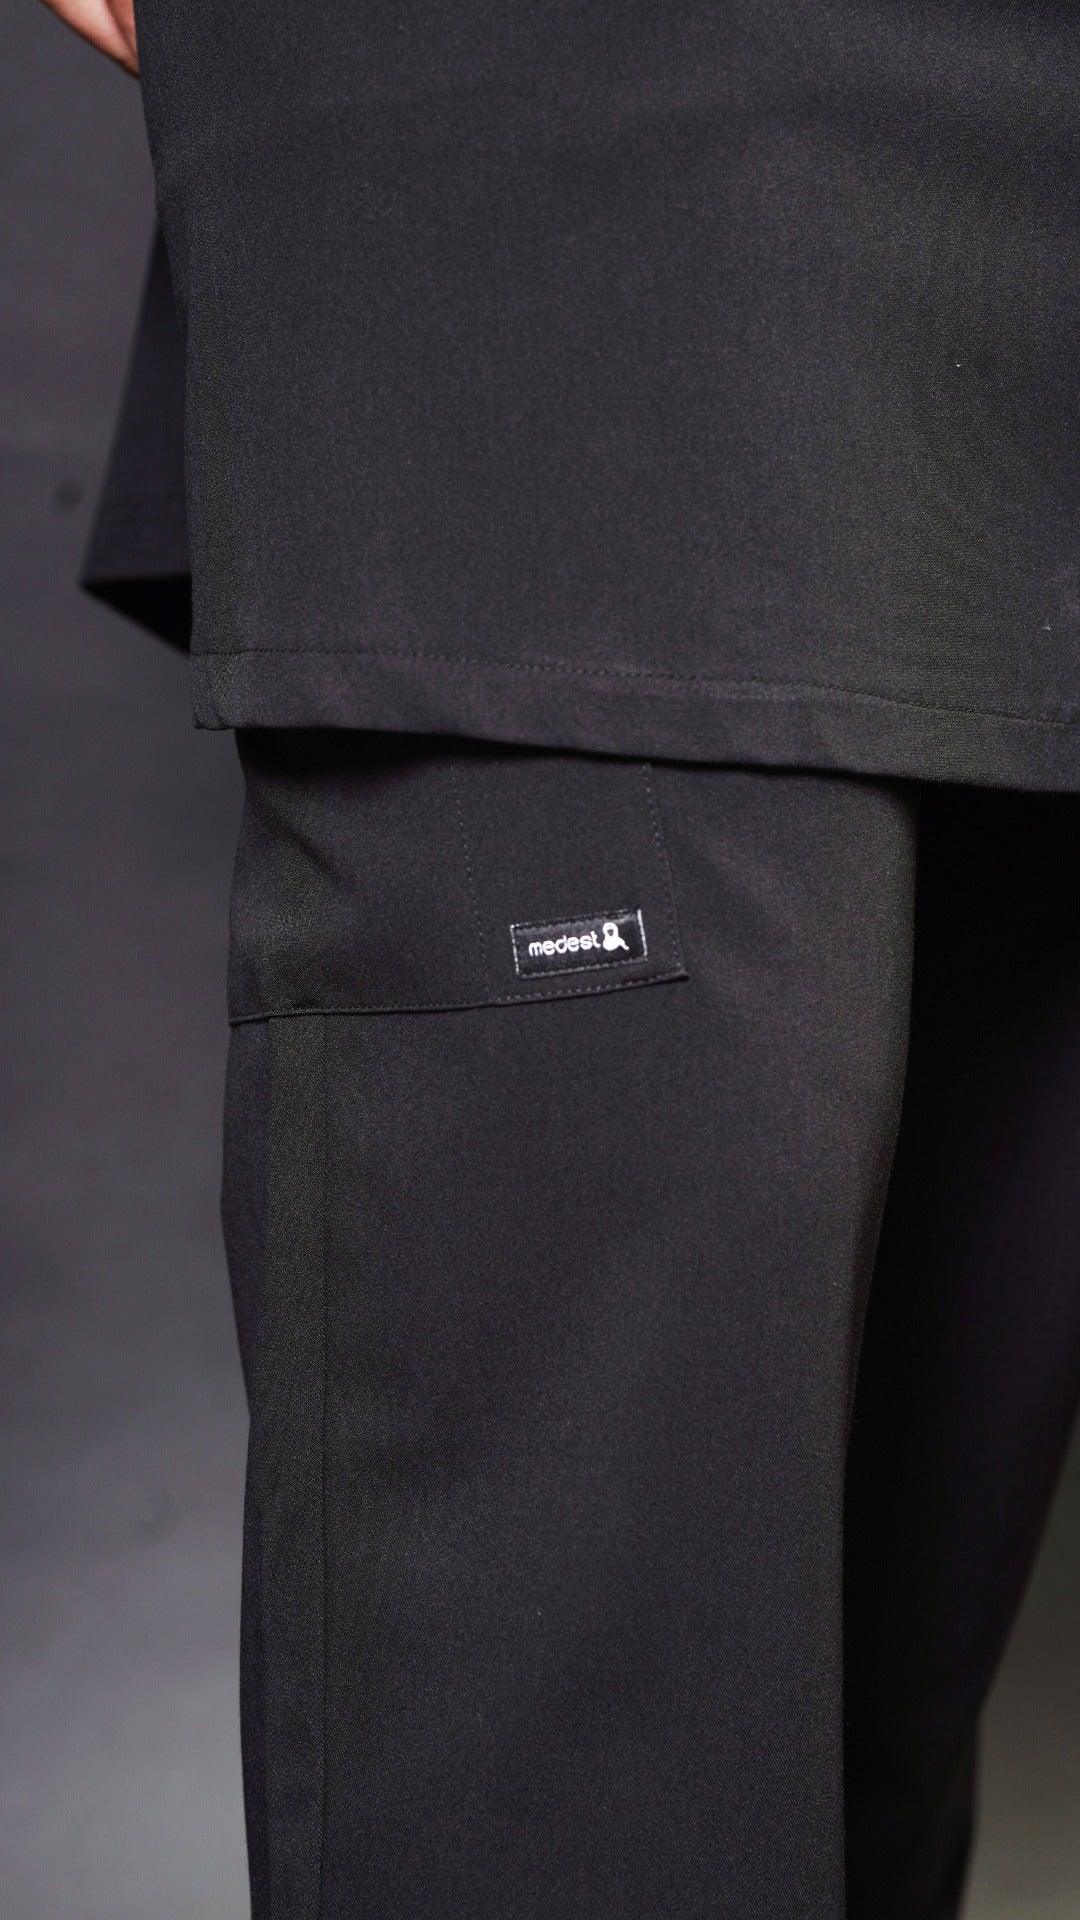 These black scrub pants are straight cut and feature 6 pockets, 2 of which are cargo pockets. They're perfect for carrying all of your essential items with you while you're on the job.